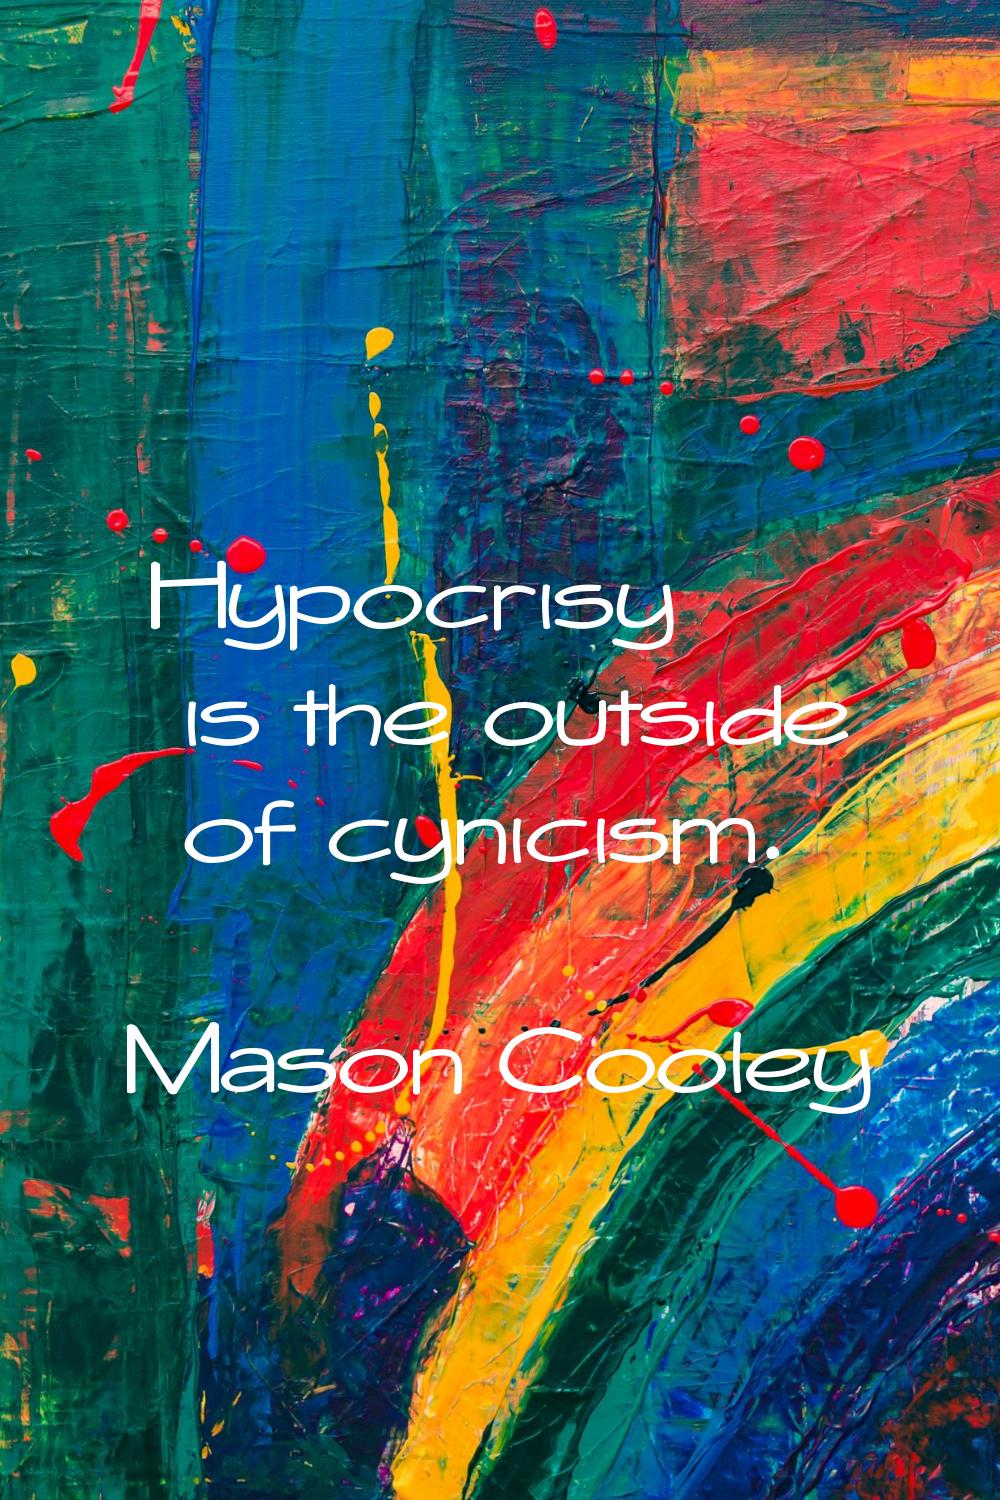 Hypocrisy is the outside of cynicism.